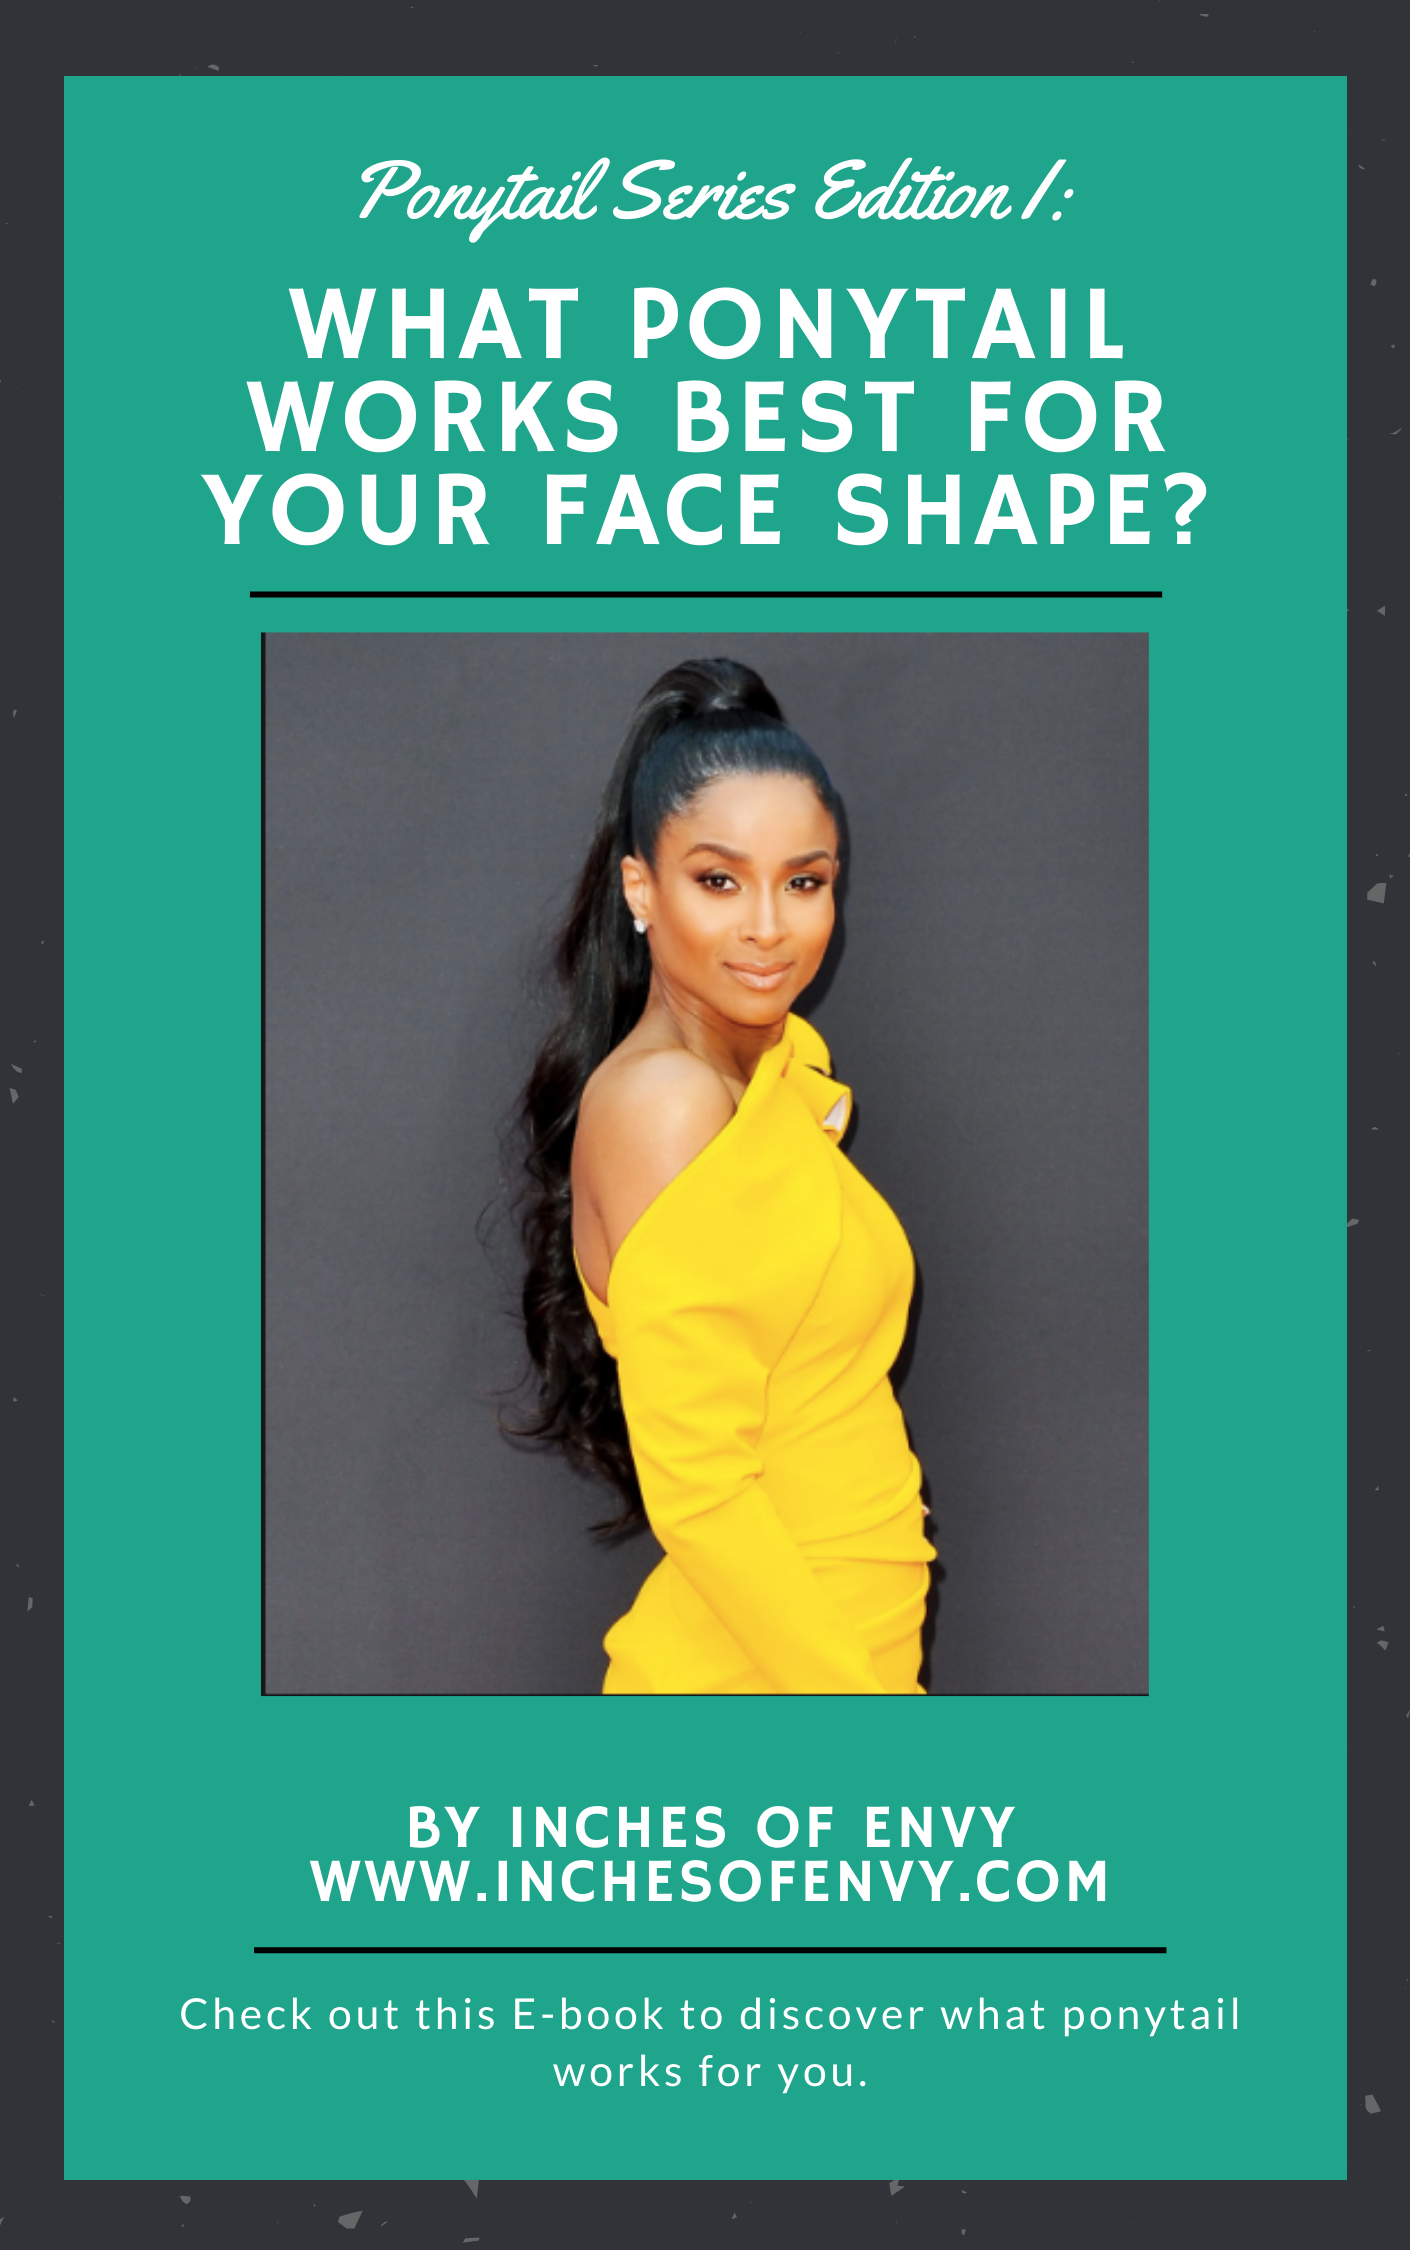 What Ponytail Works Best For Your Face Shape?